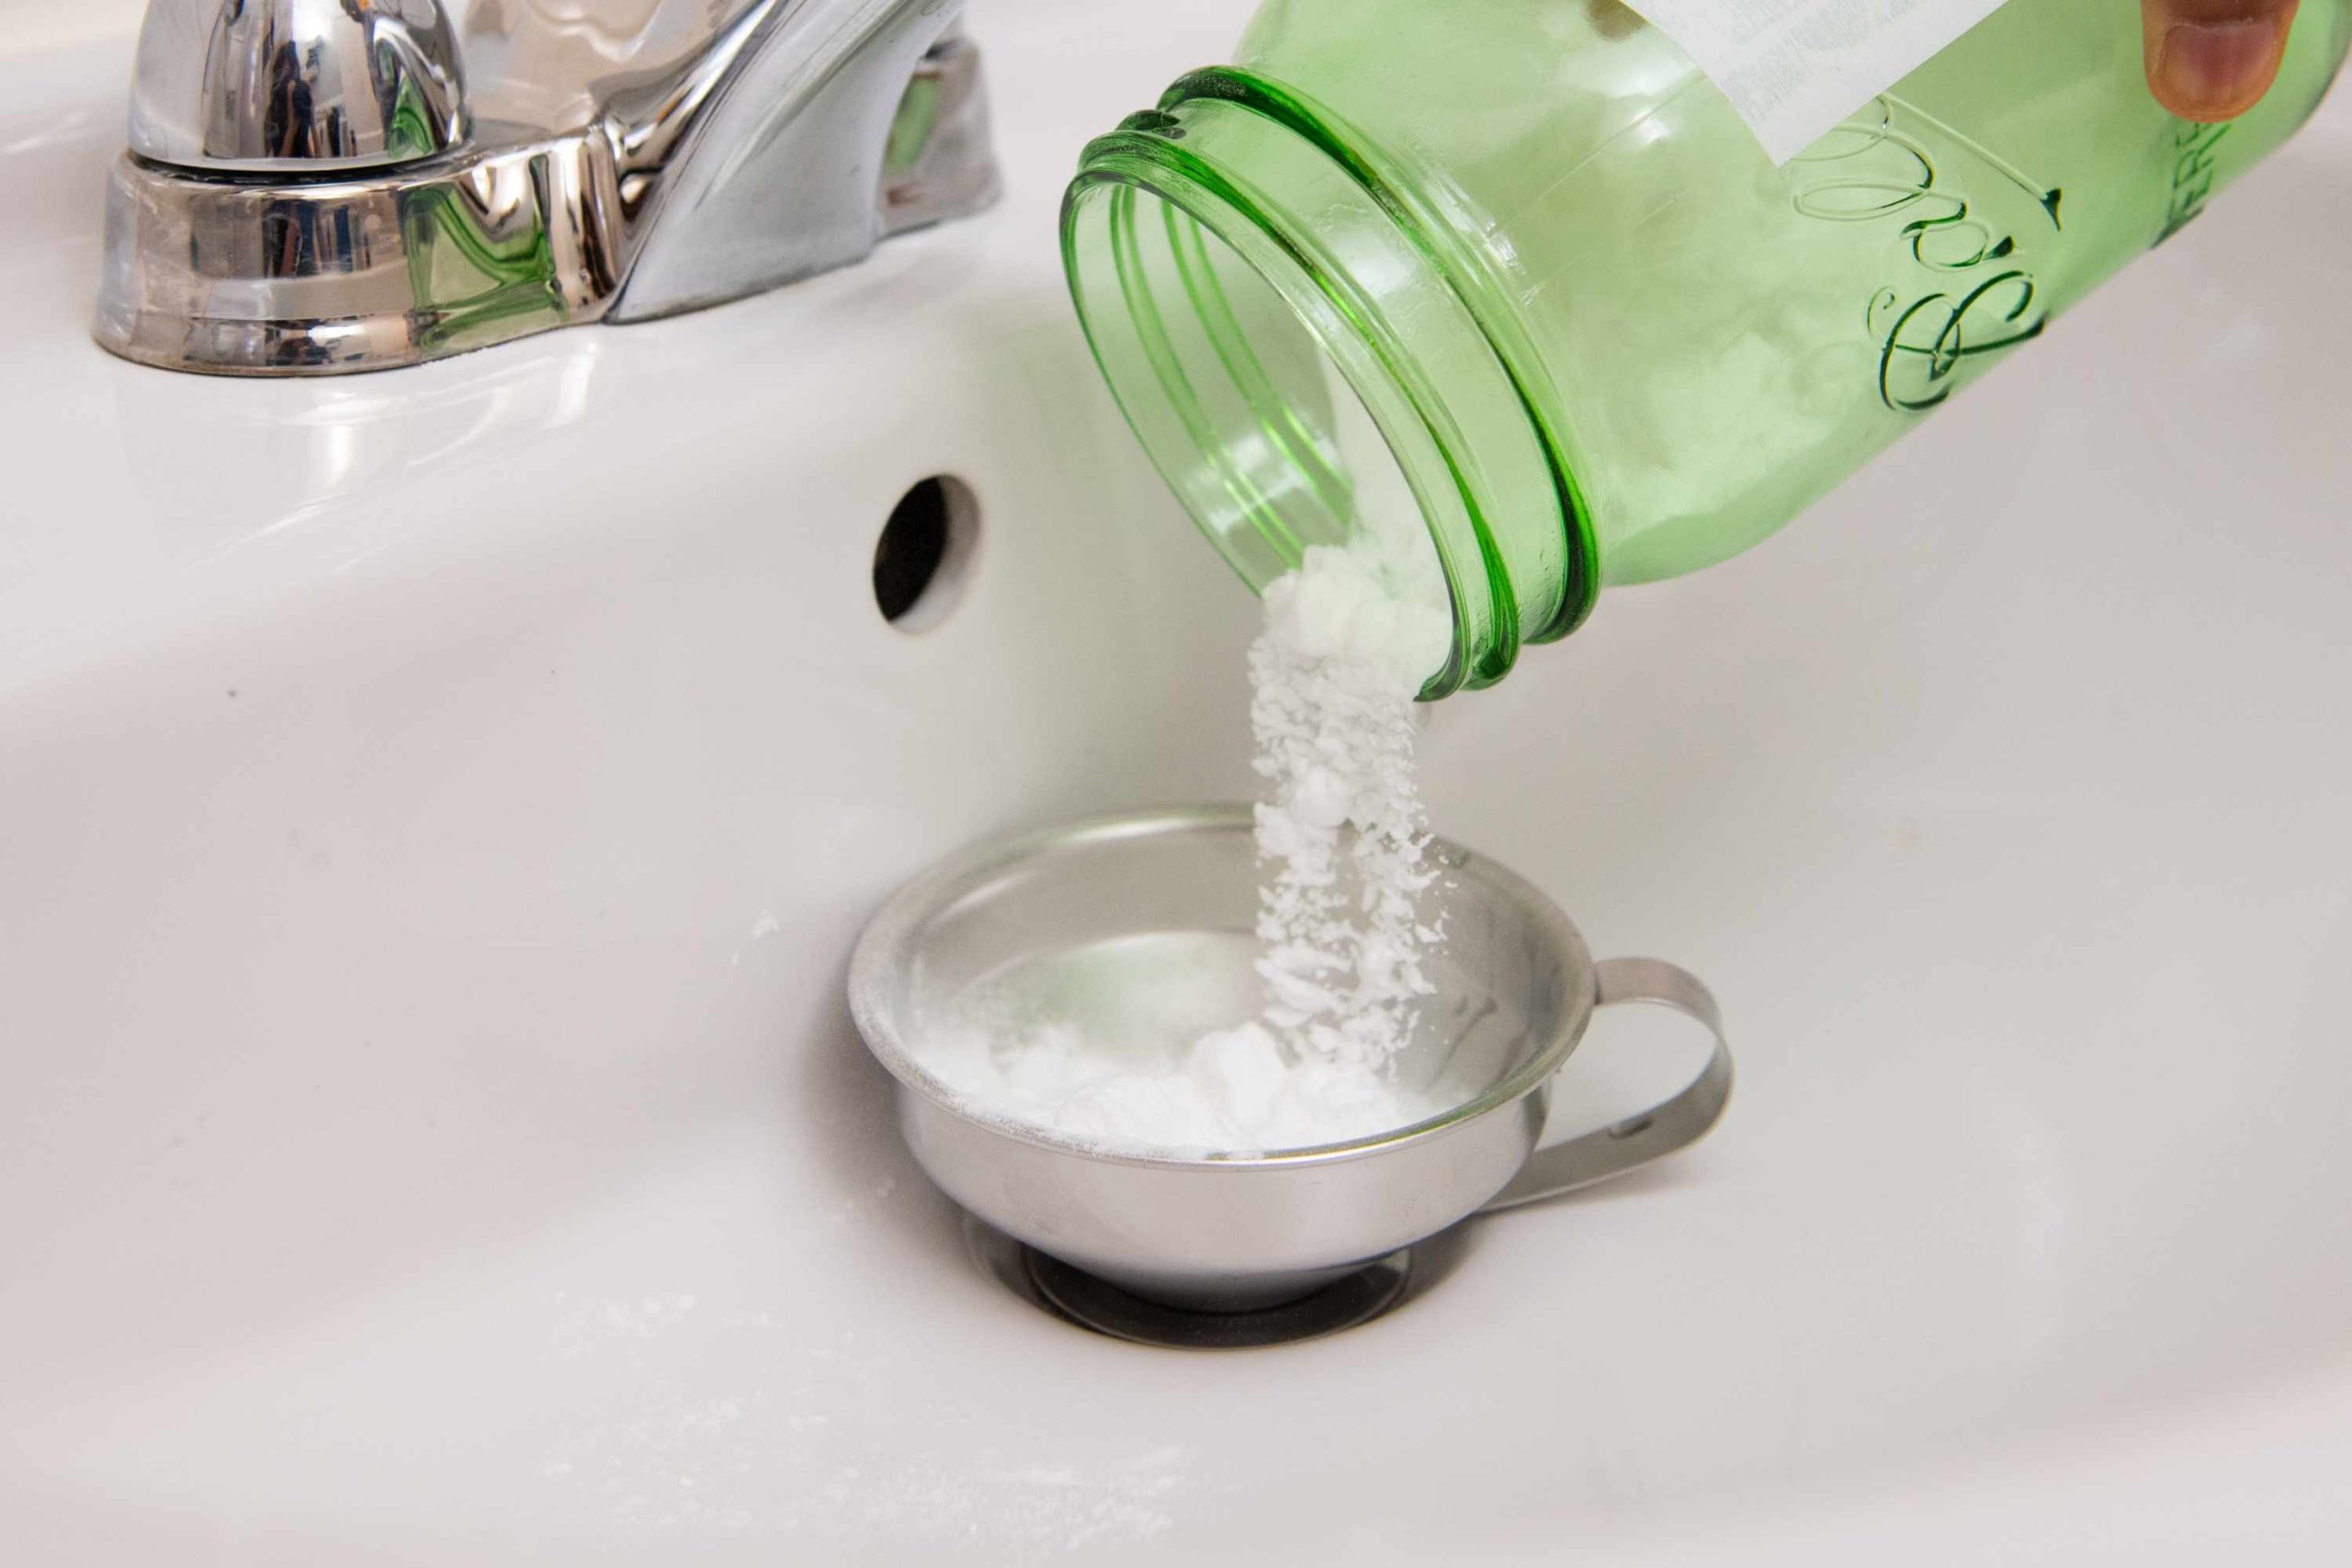 How to Clean a Drain With Baking Soda and Vinegar